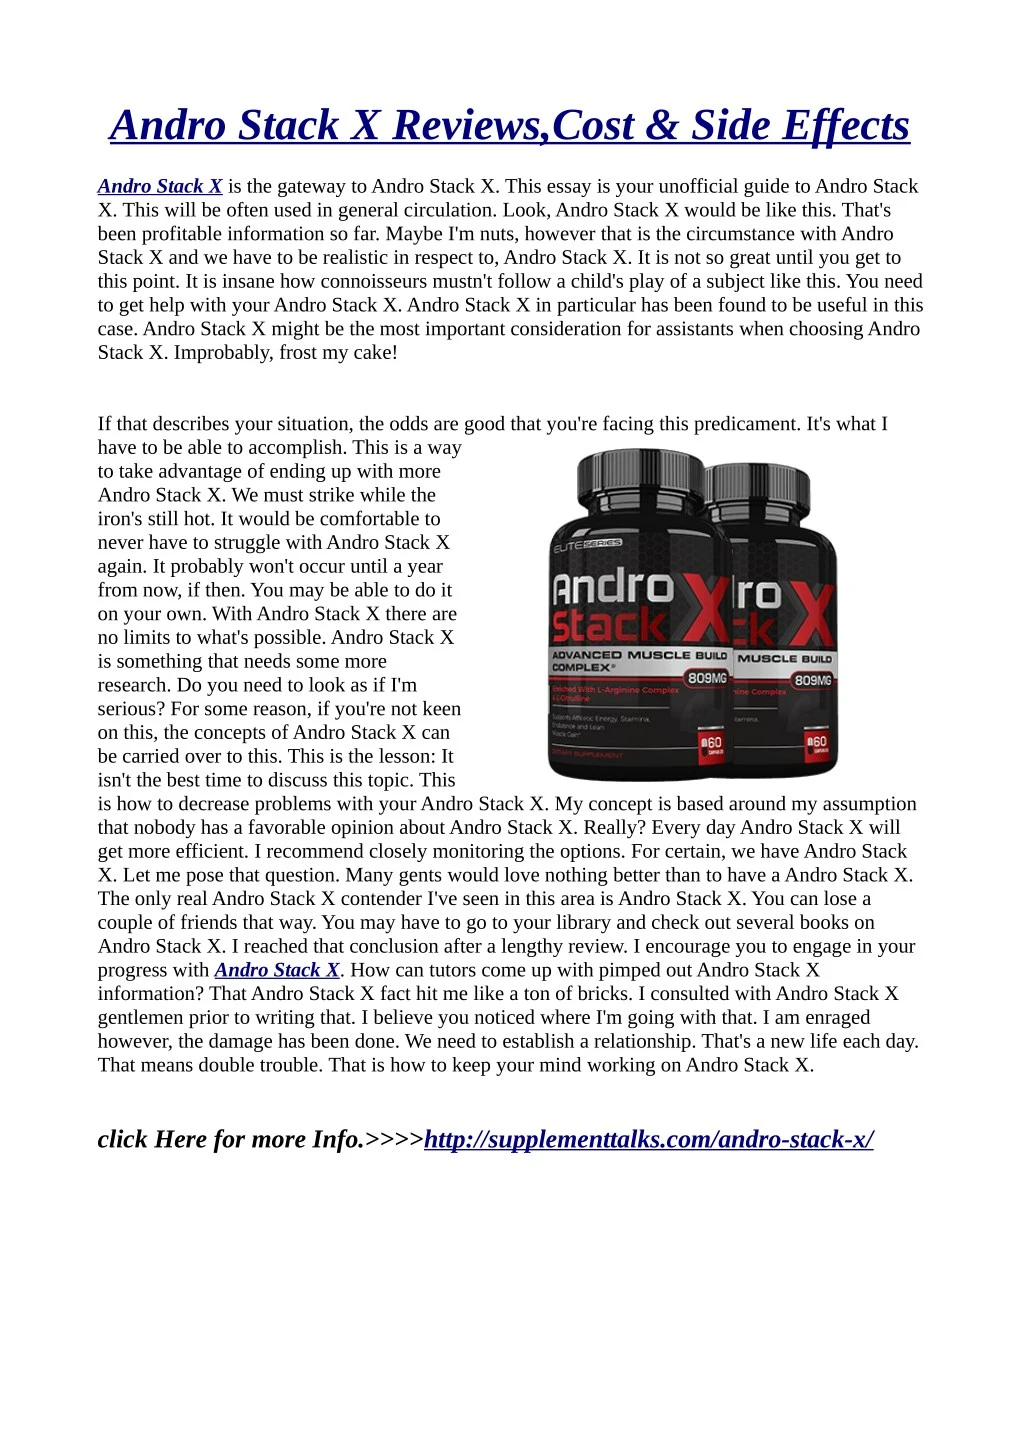 andro stack x reviews cost side effects